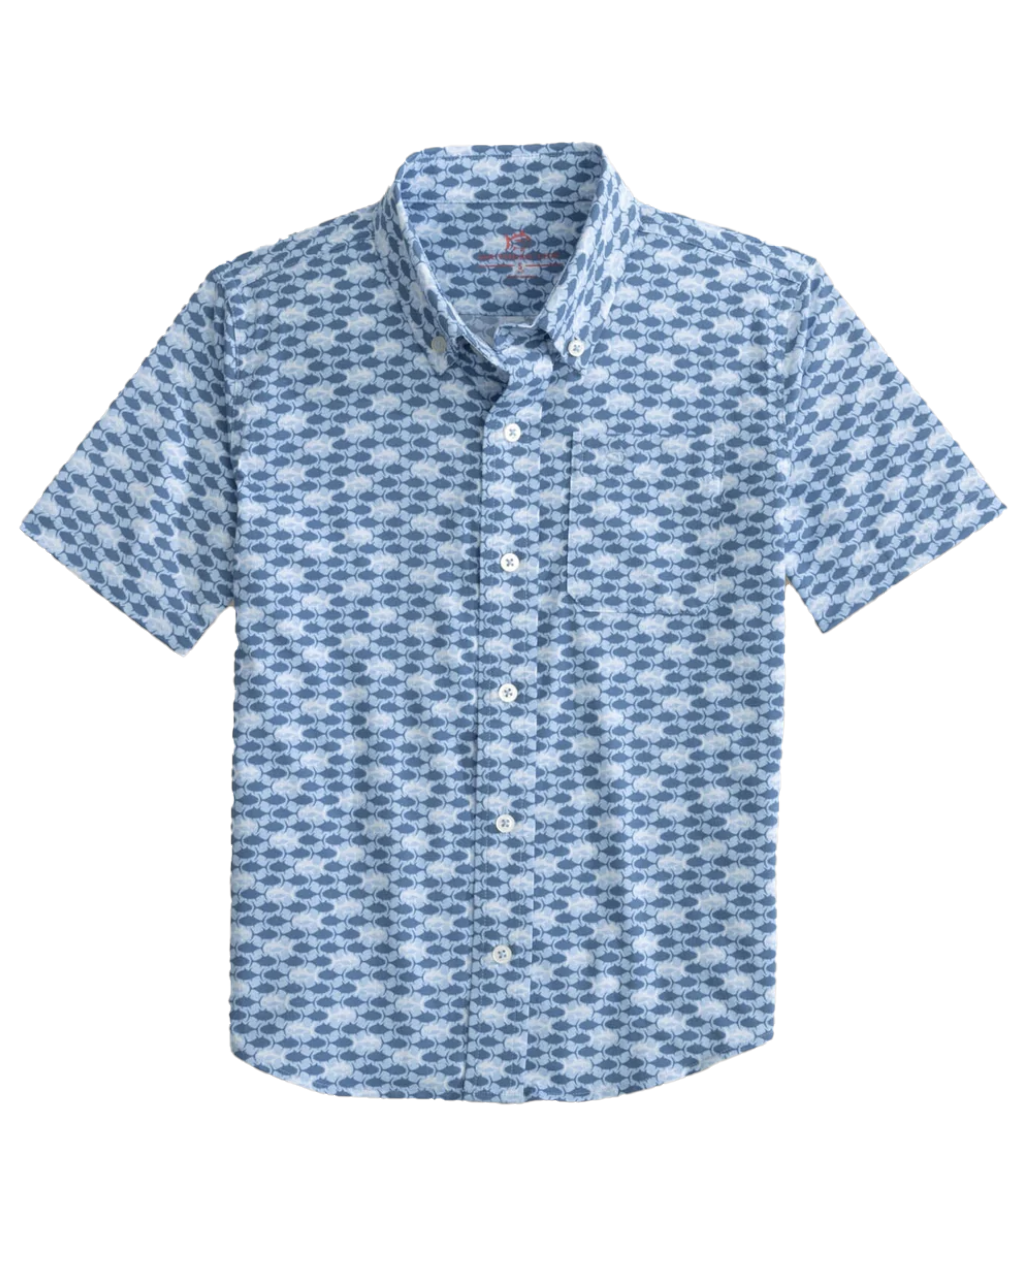 Youth Skipping Jacks SS Shirt Clearwater Blue